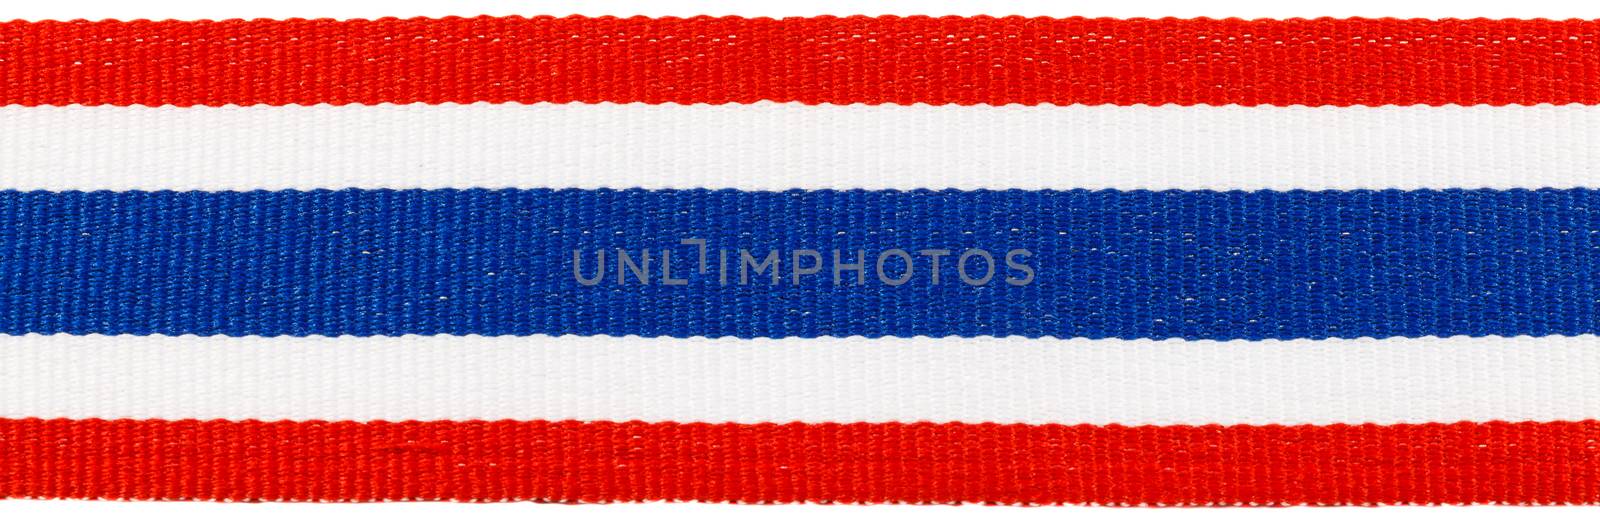 ribbon with thai flag pattern by stockdevil